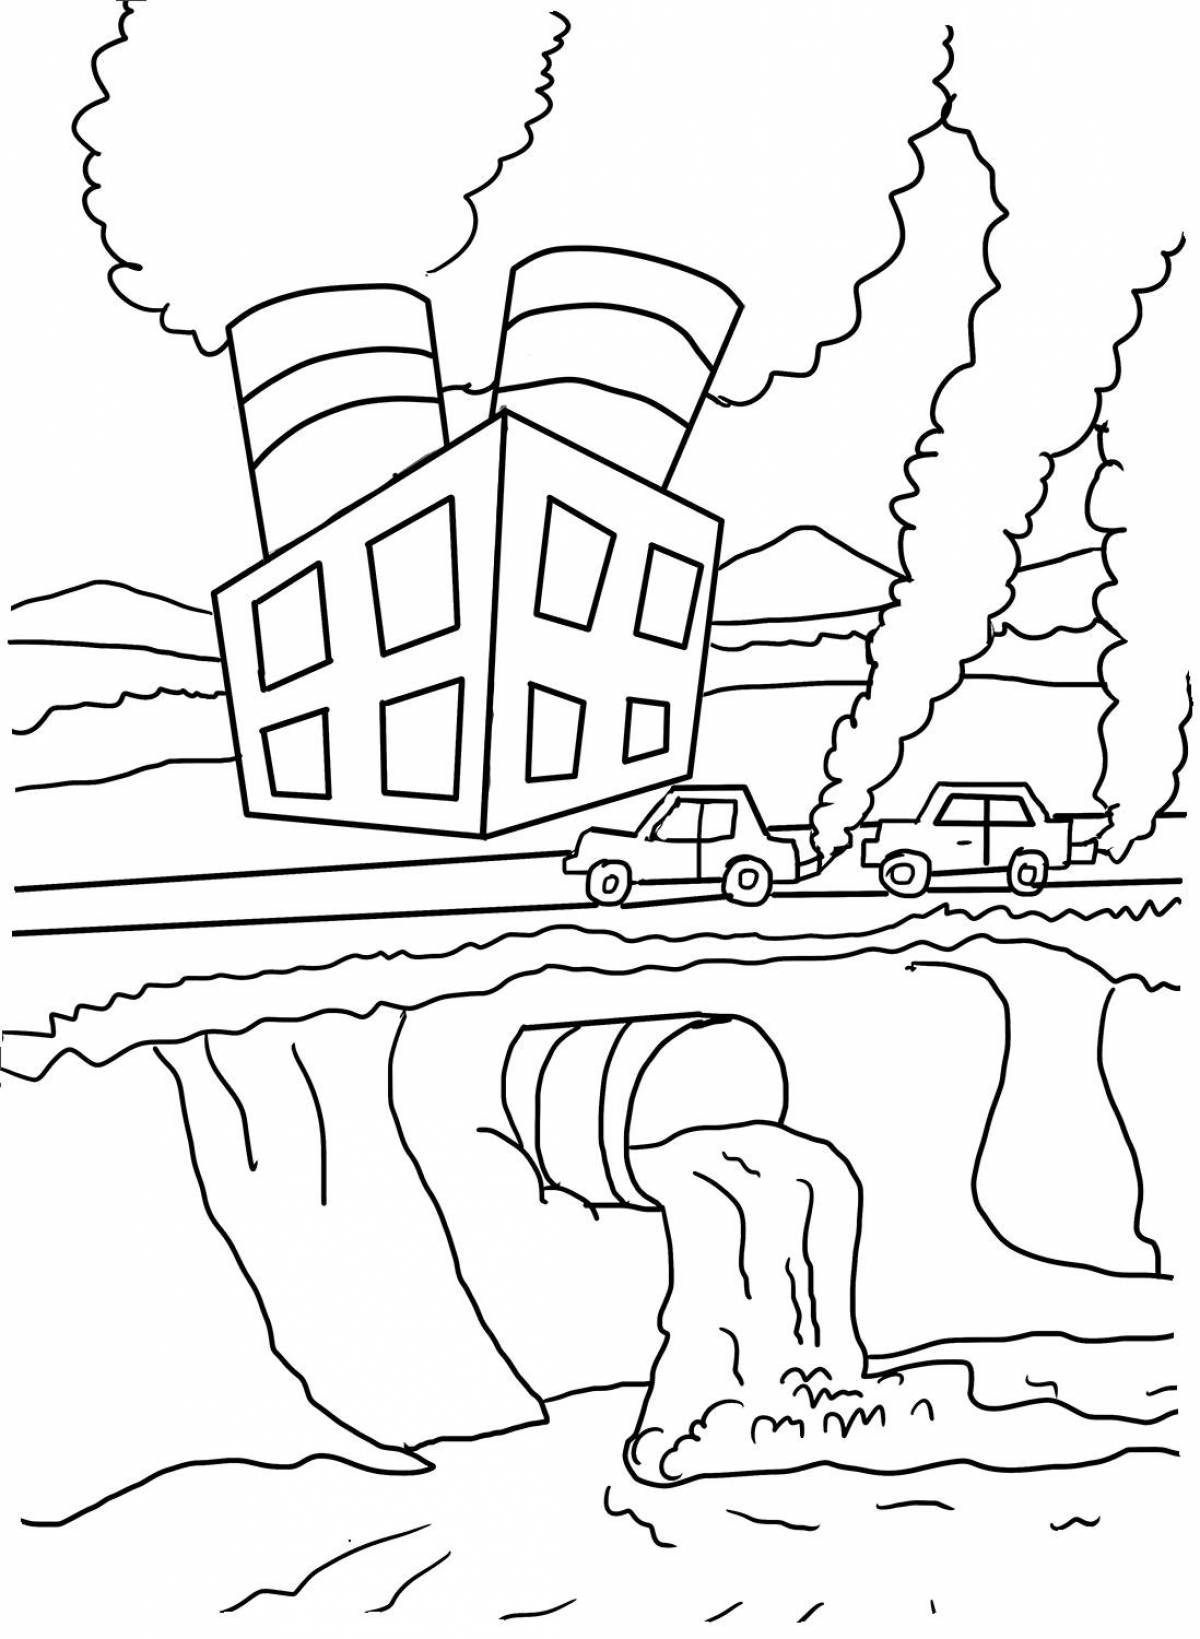 Ecology coloring page